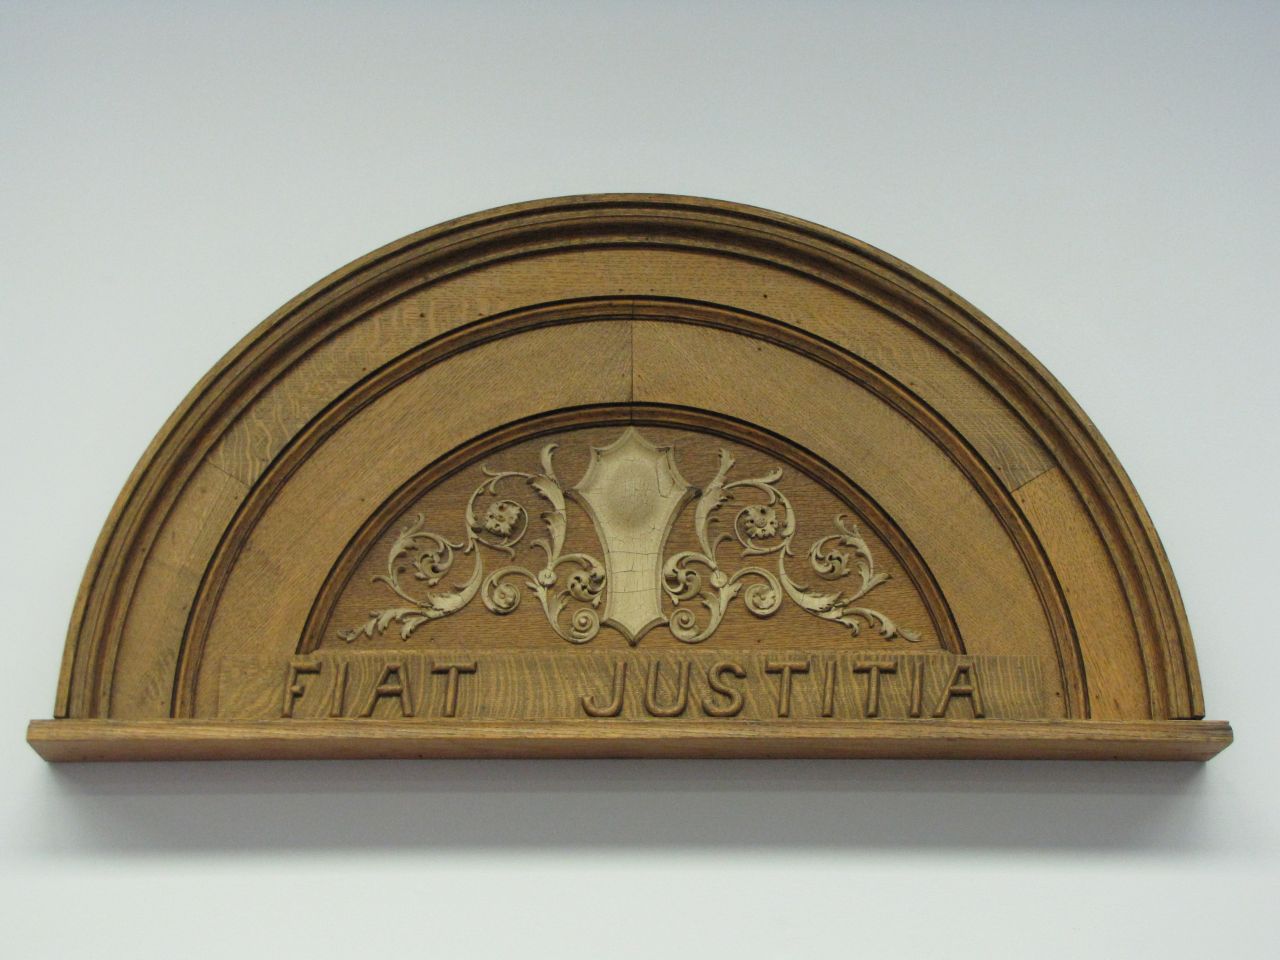 Fita Justitia: Let justice be done